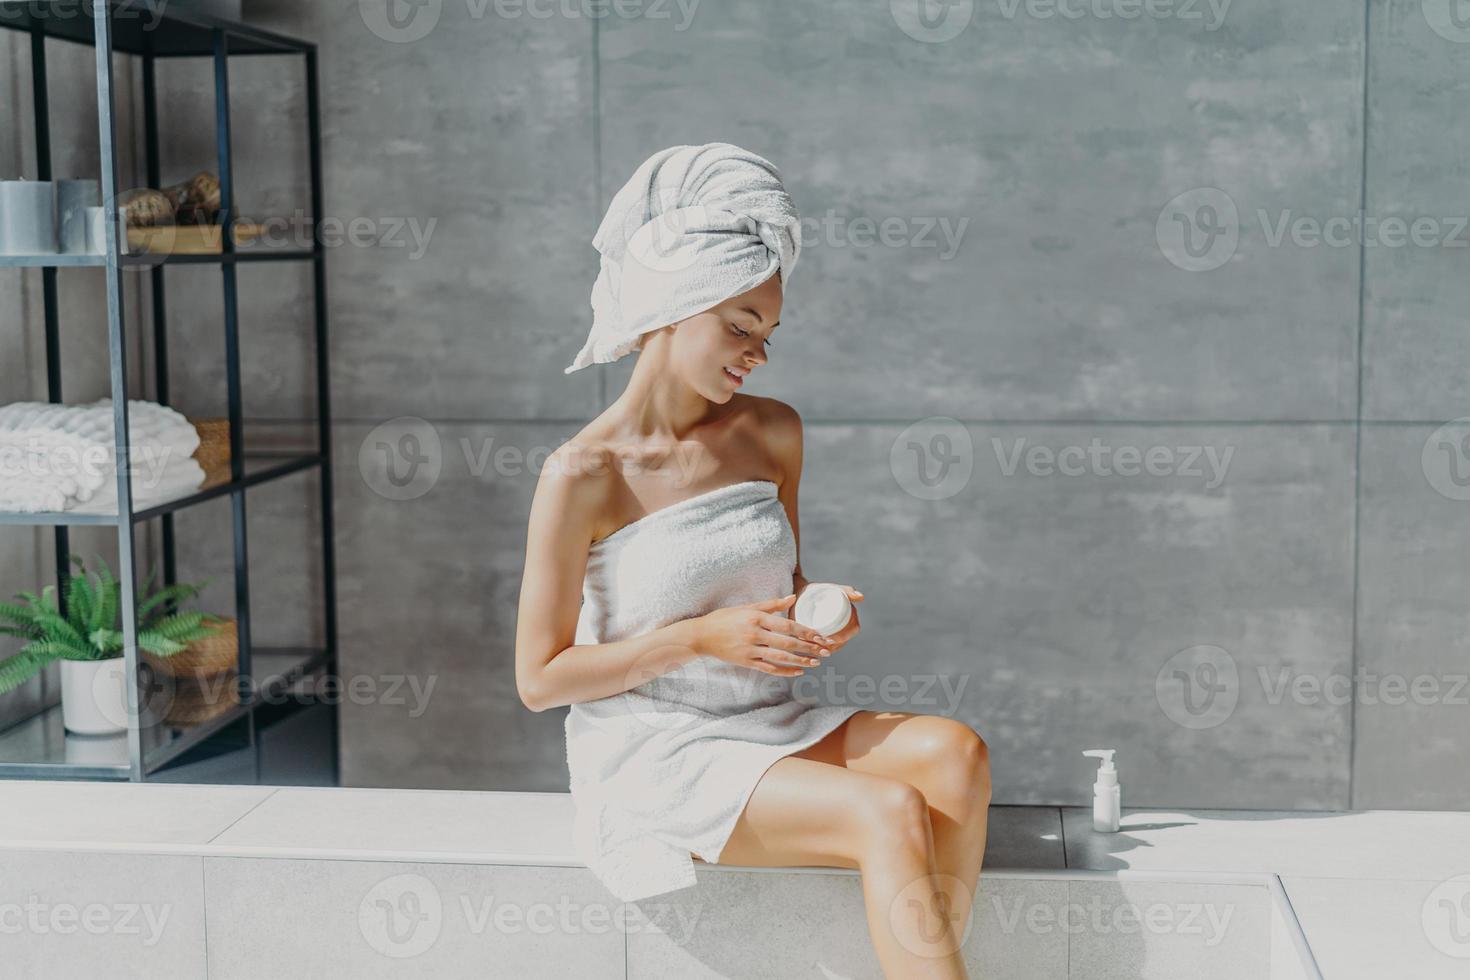 Relaxed young European woman applies moisturizer cream on legs after taking bath sits wrapped in towel in bathroom, enjoys beauty treatments, uses cosmetic product for healthy skin. Hygiene concept photo